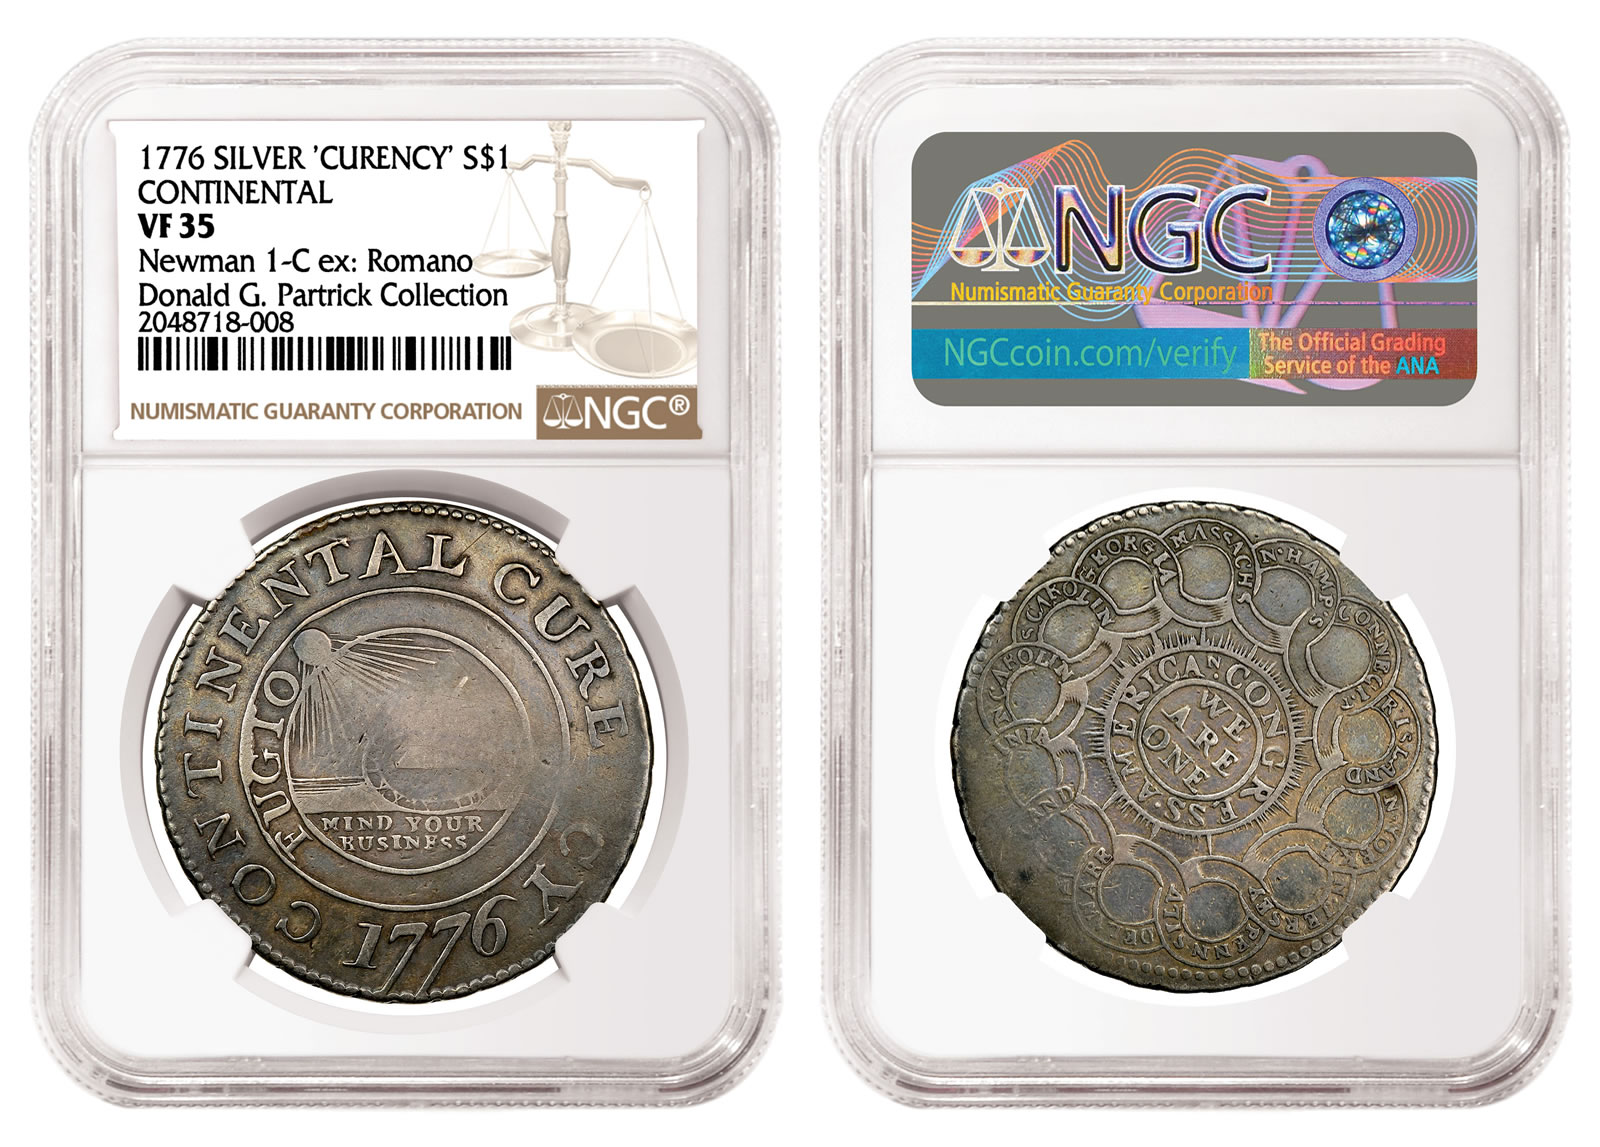 NGC-Certified Coins from 1700s Top $1 Million